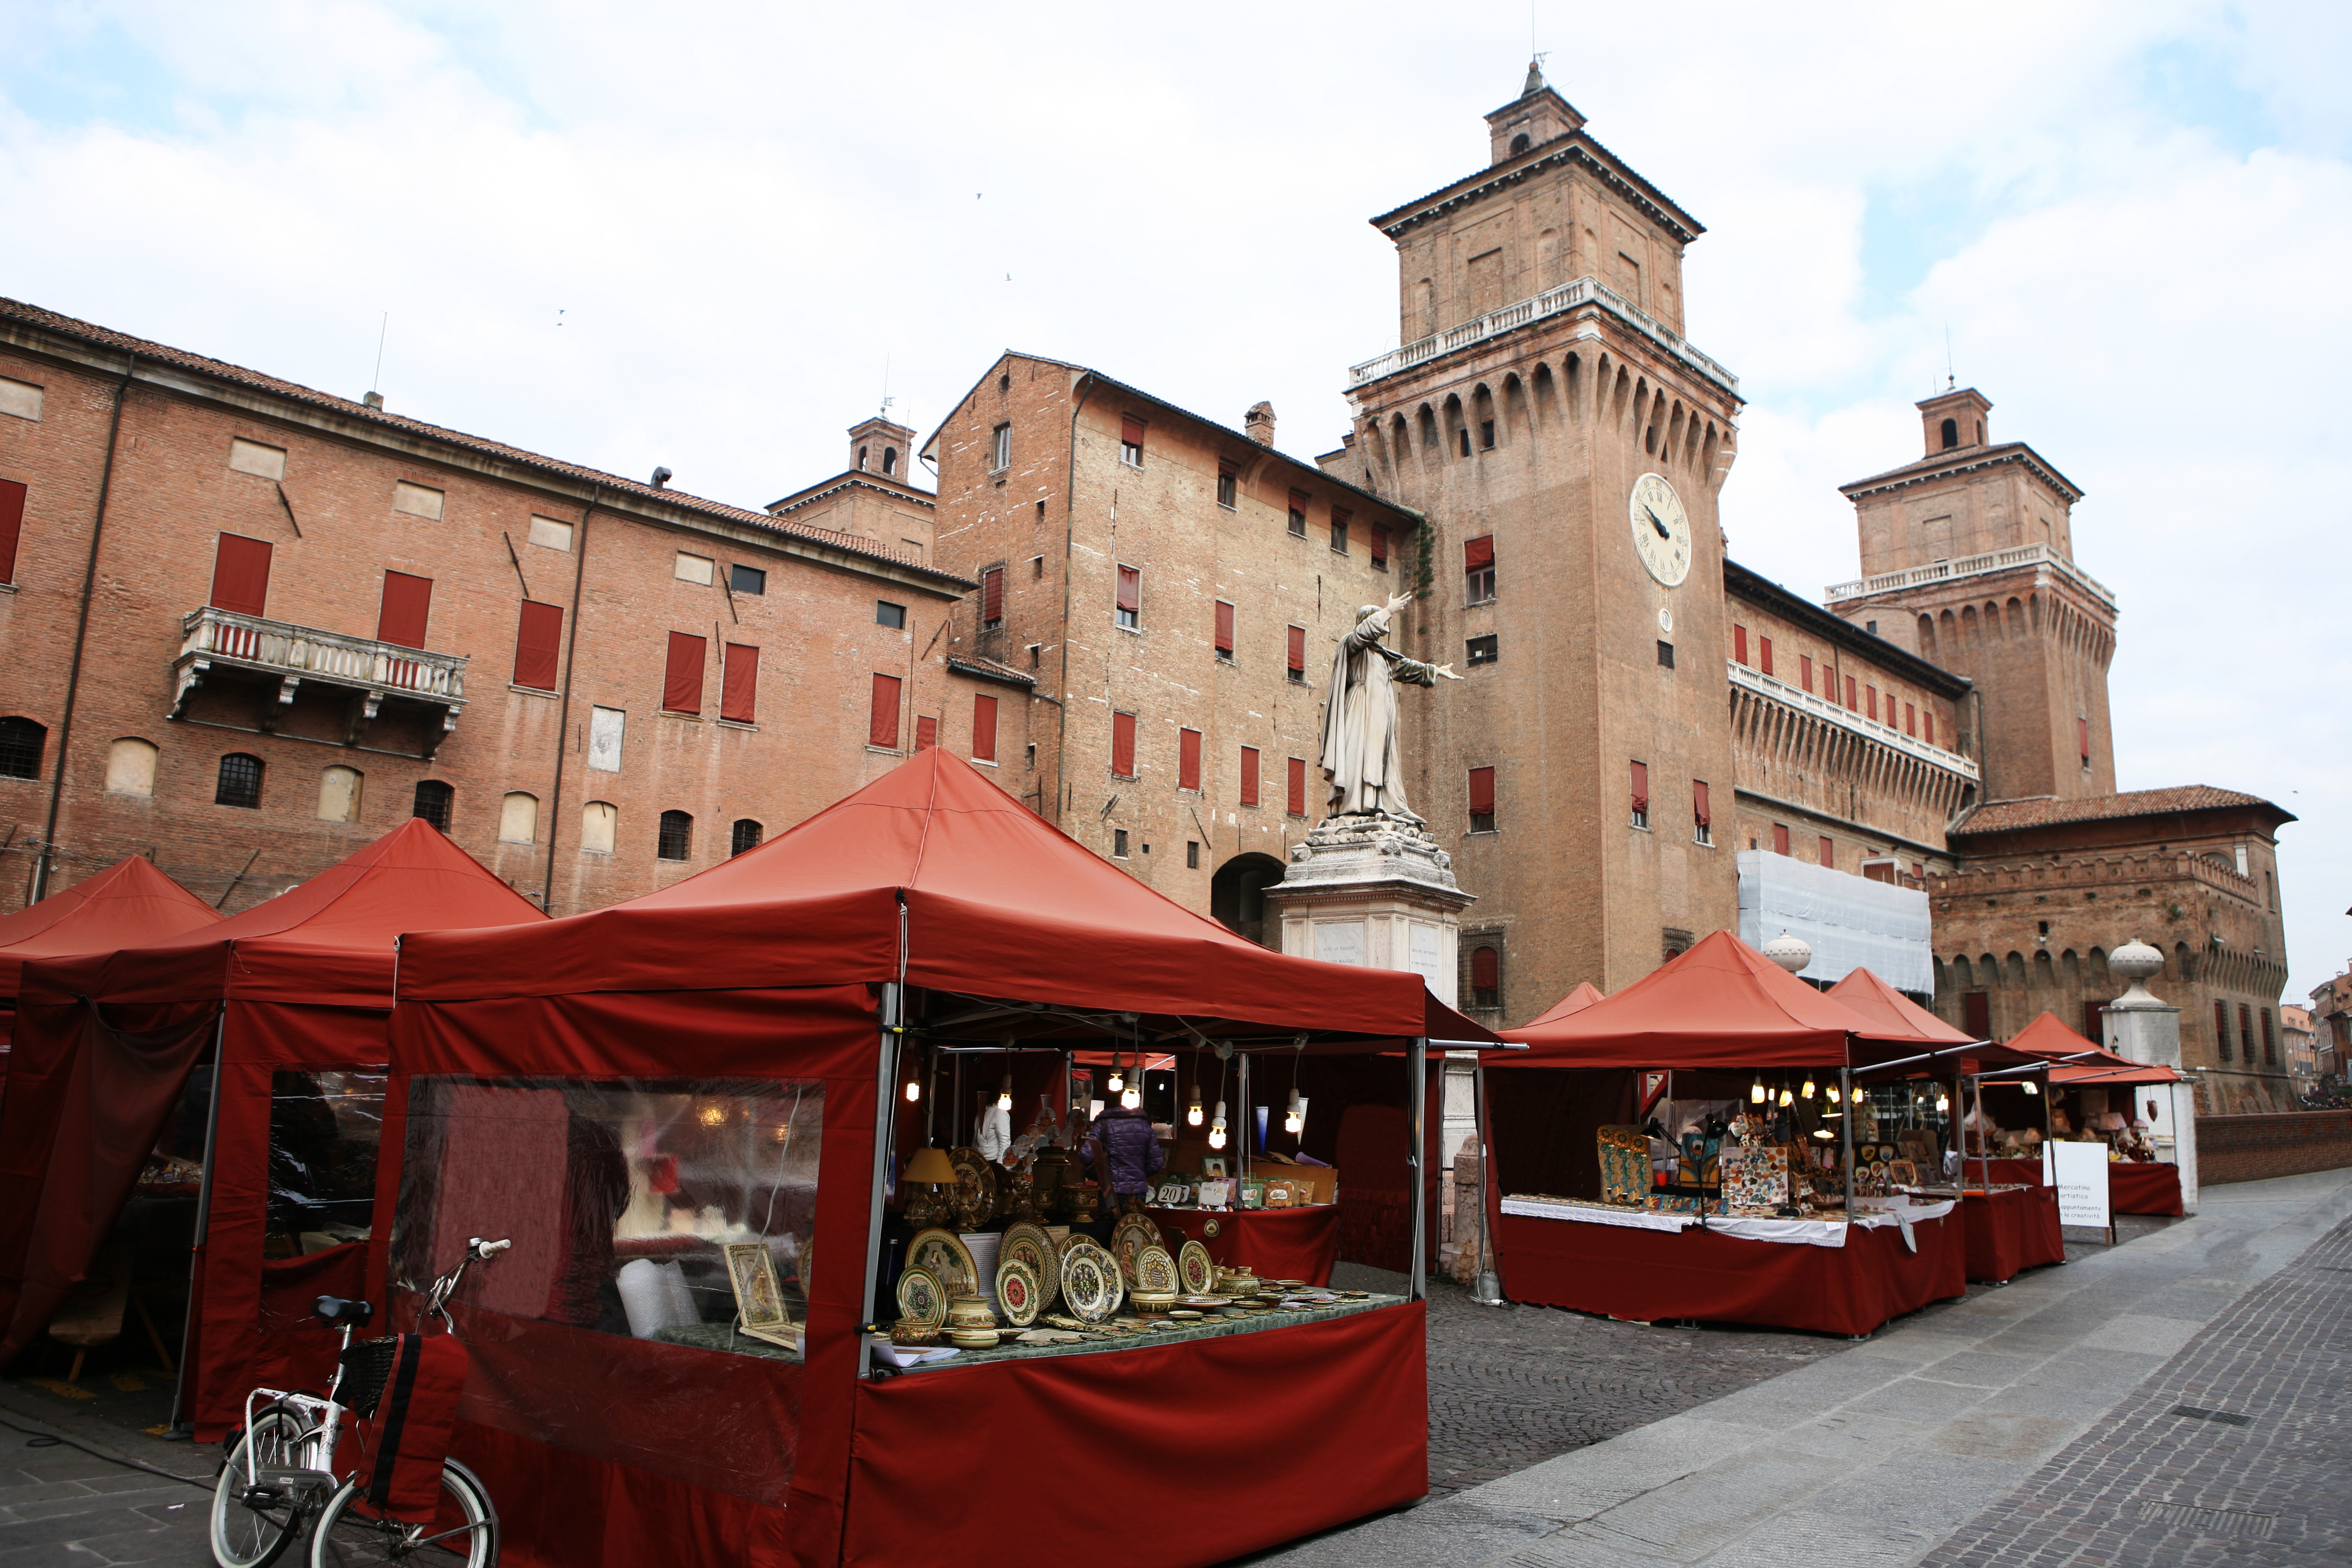 Ferrara antique market and old time objects - Bertazzoni